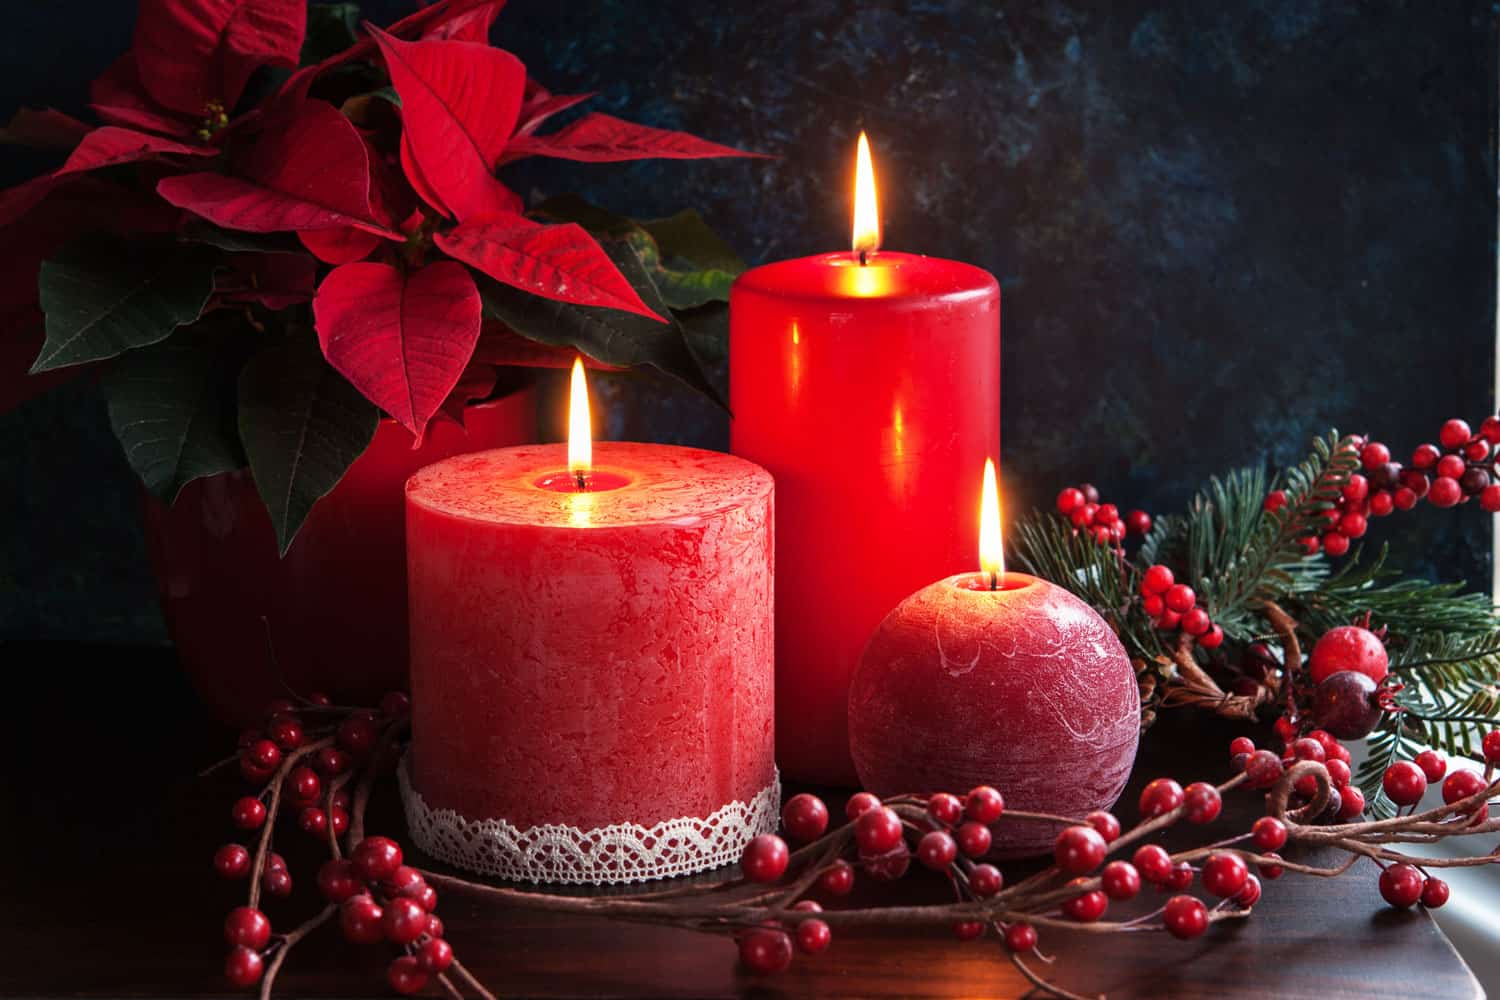 Bright red candles and a beautiful Poinsettia on the side